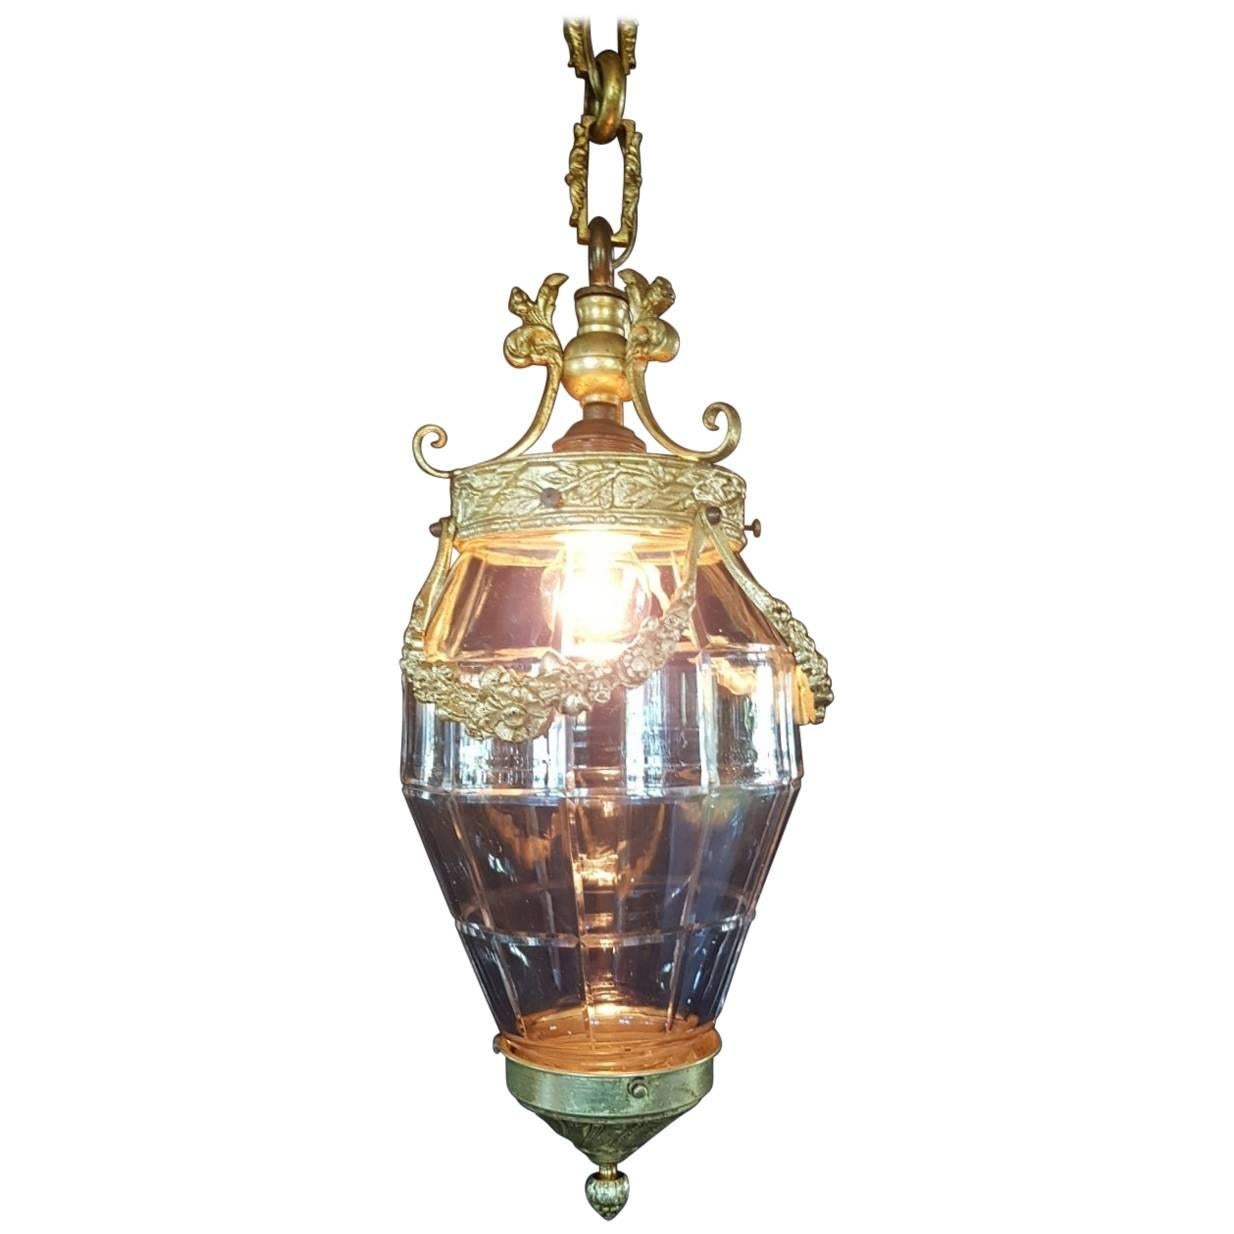 Antique Gilt Bronze Lantern with Molded Cut-Glass For Sale